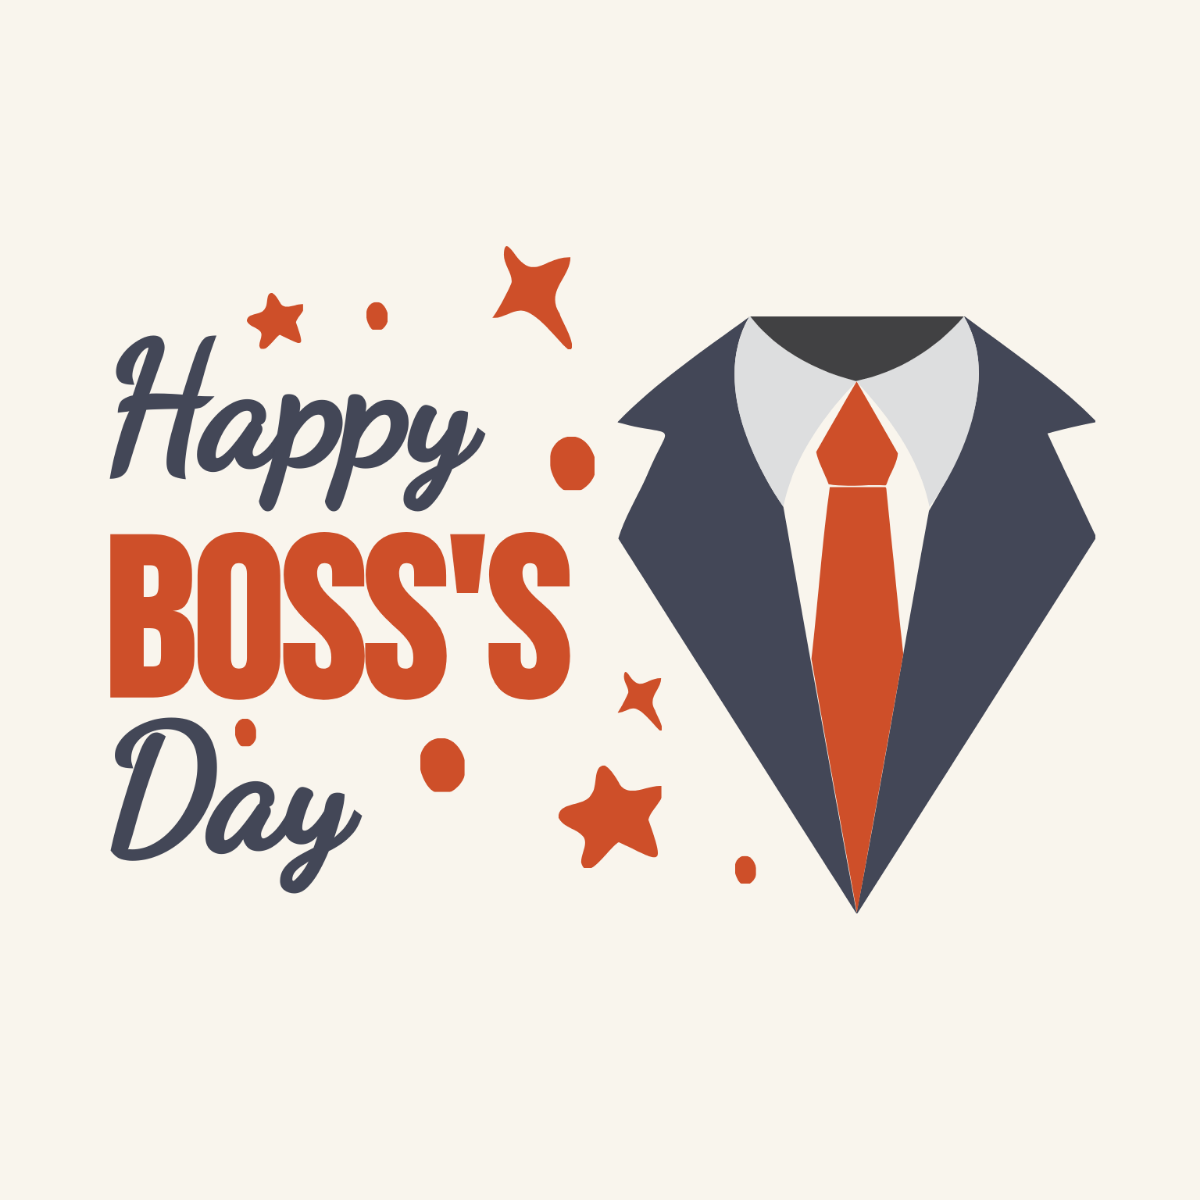 Happy Boss' Day Illustration Template